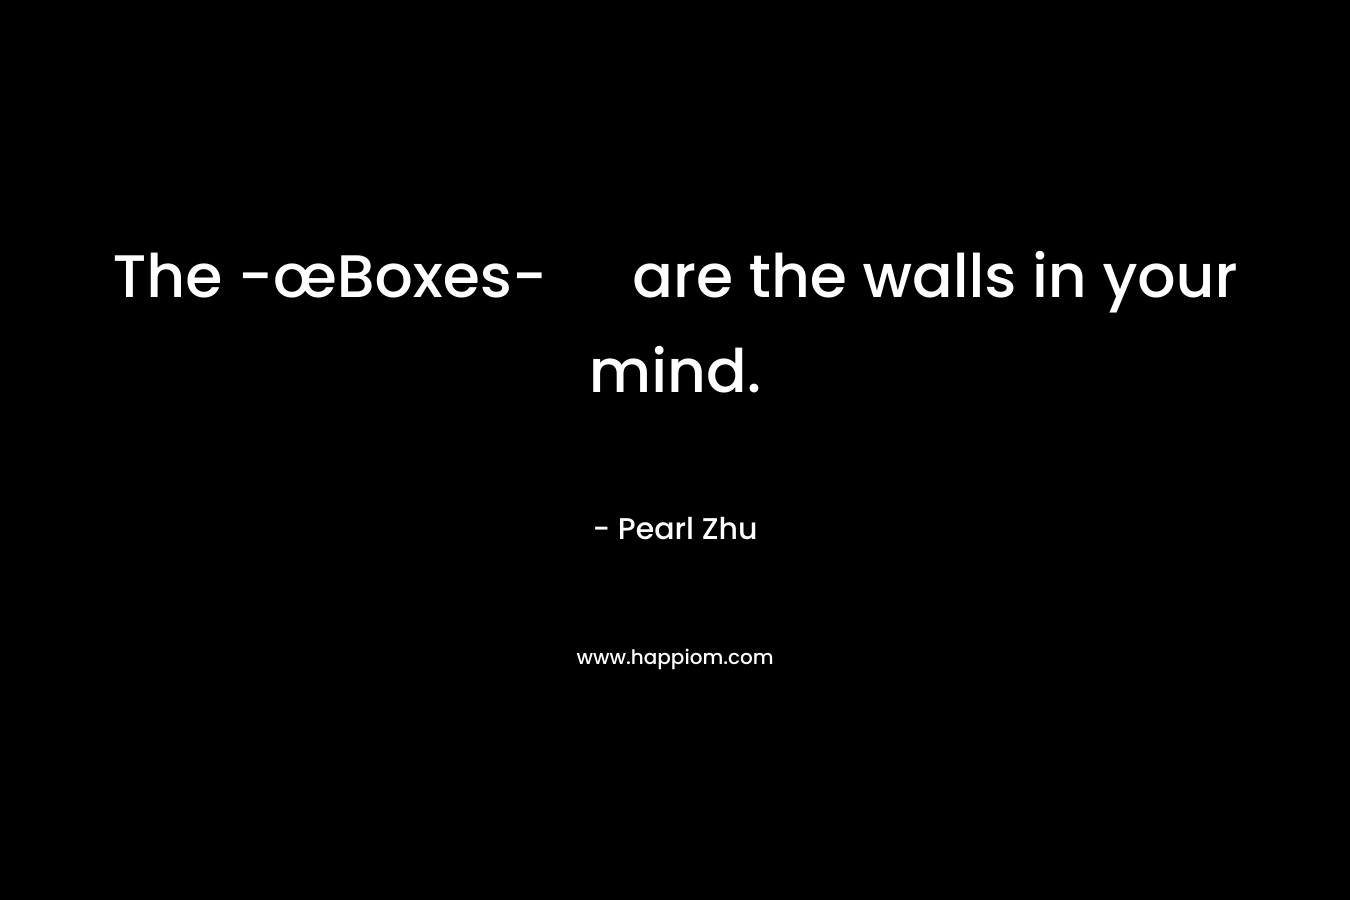 The -œBoxes- are the walls in your mind.